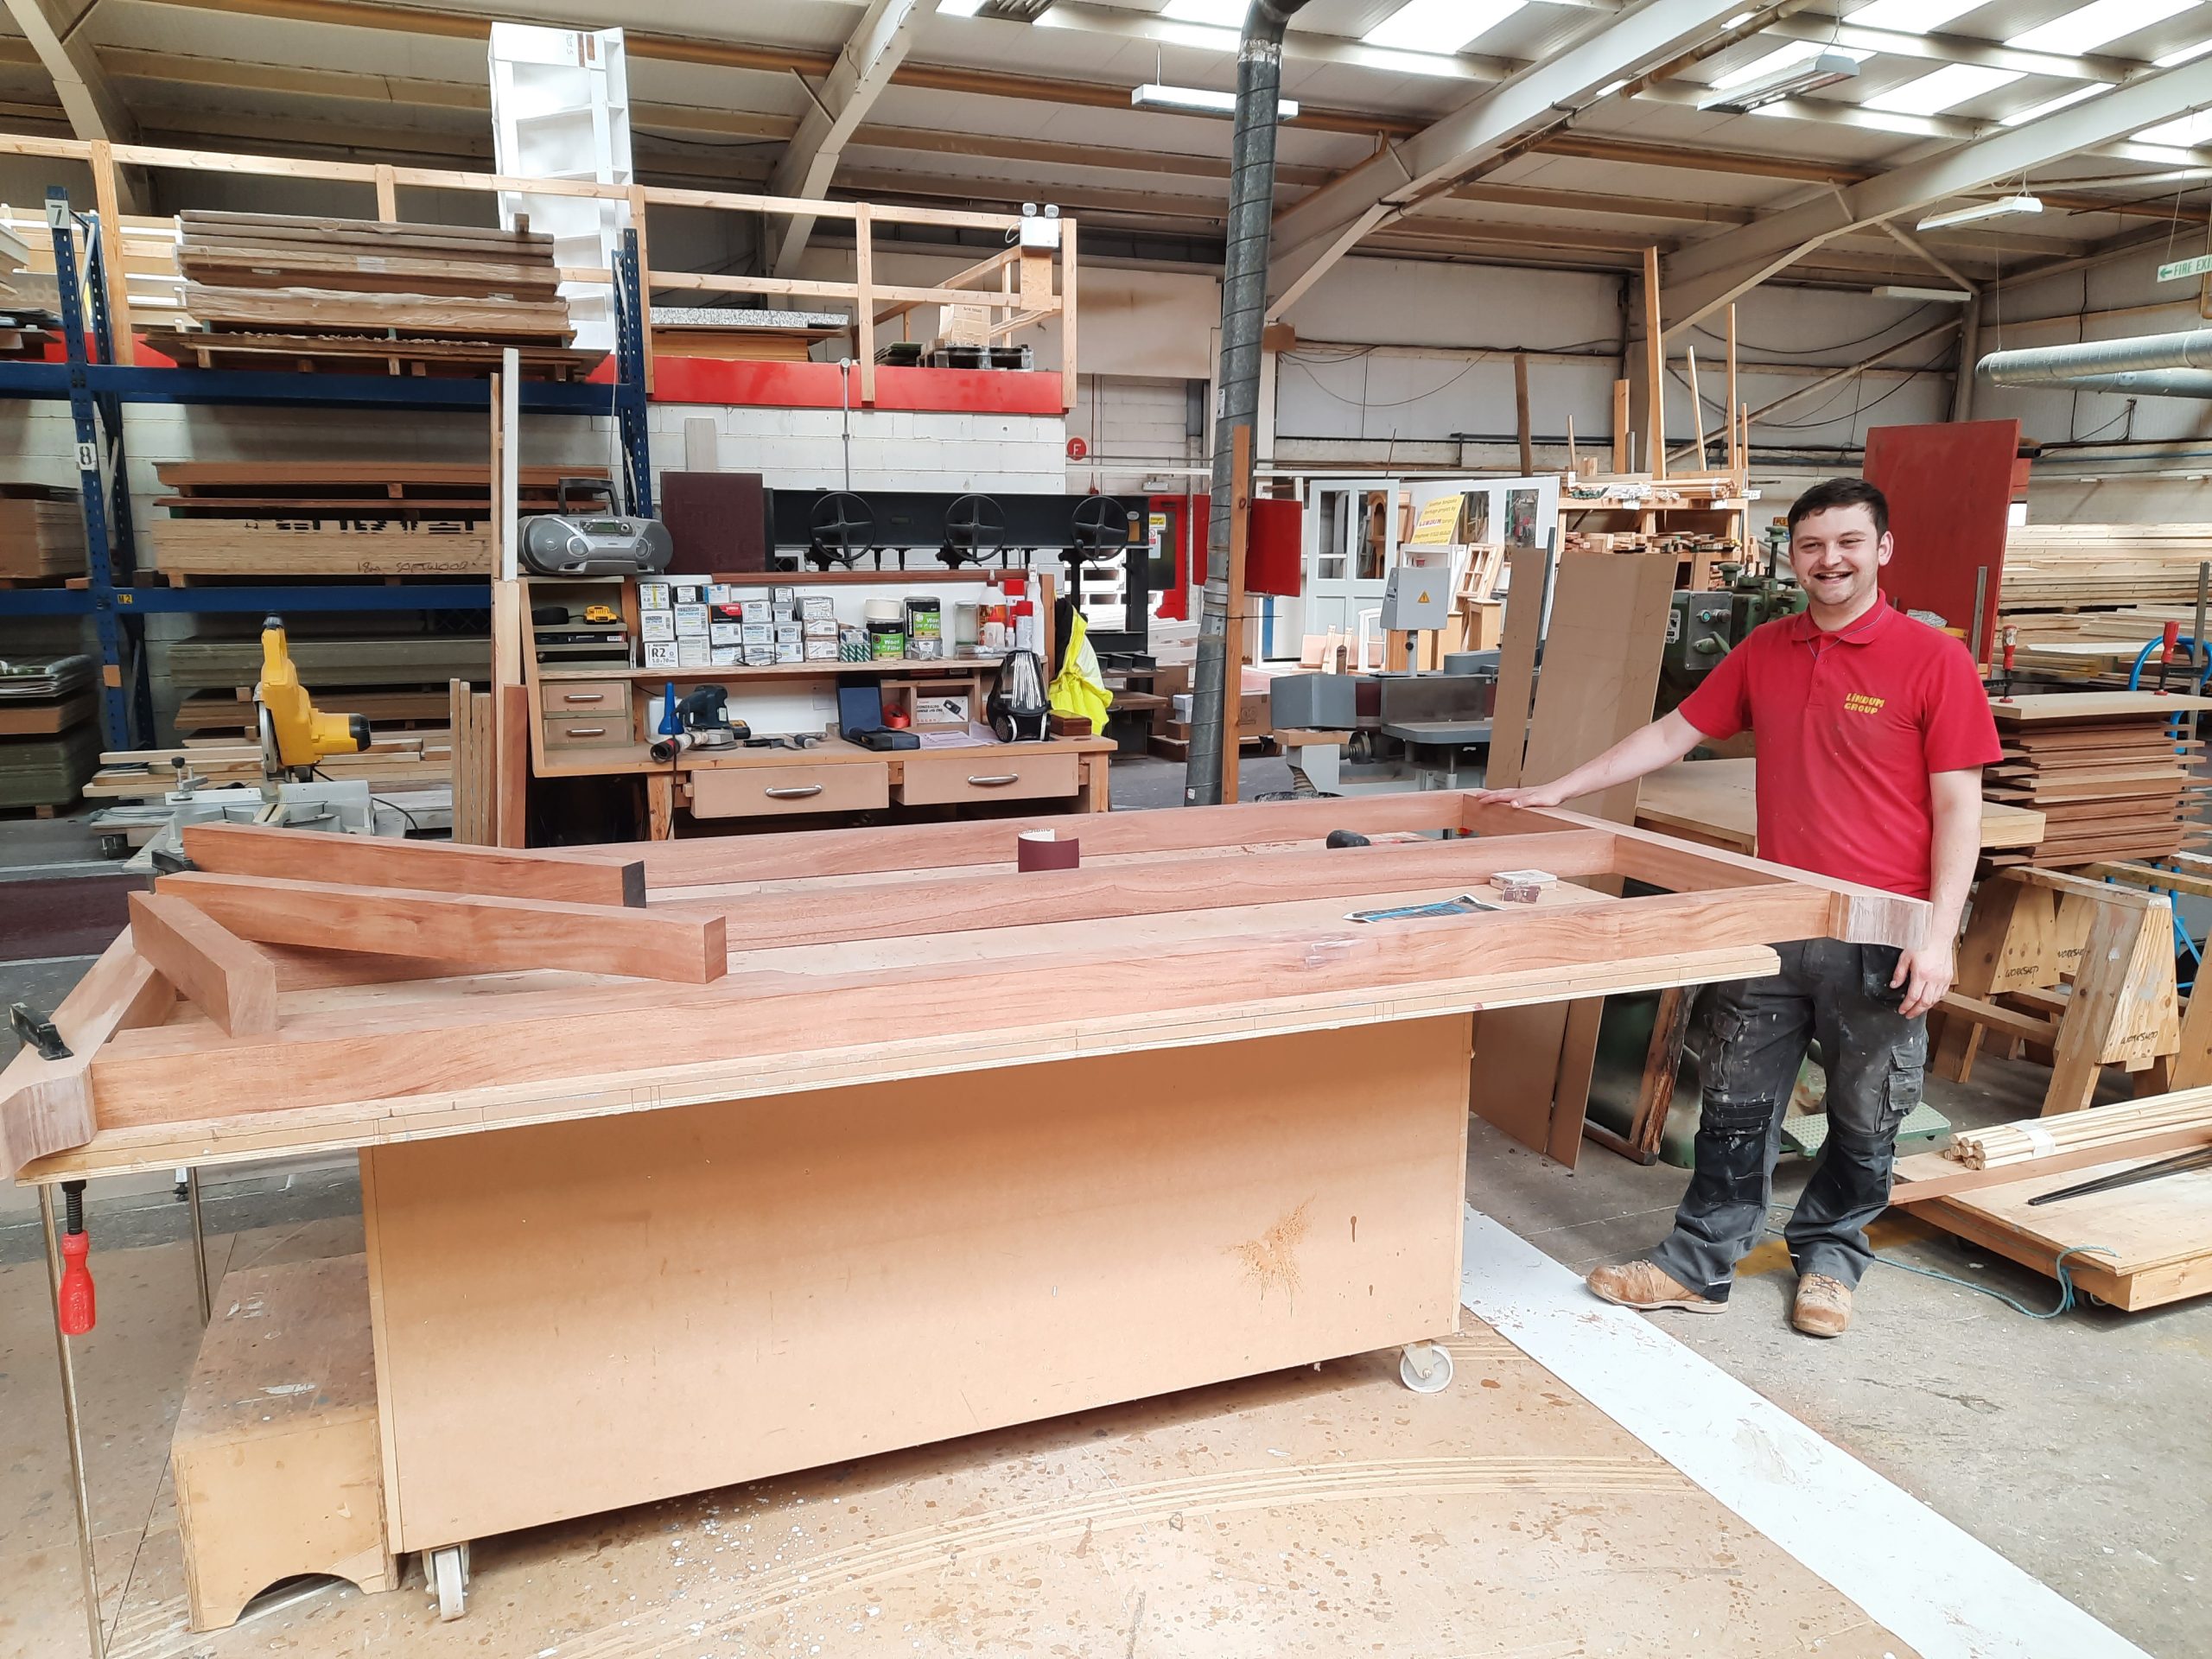 Joiner Liam builds new career after apprenticeship success